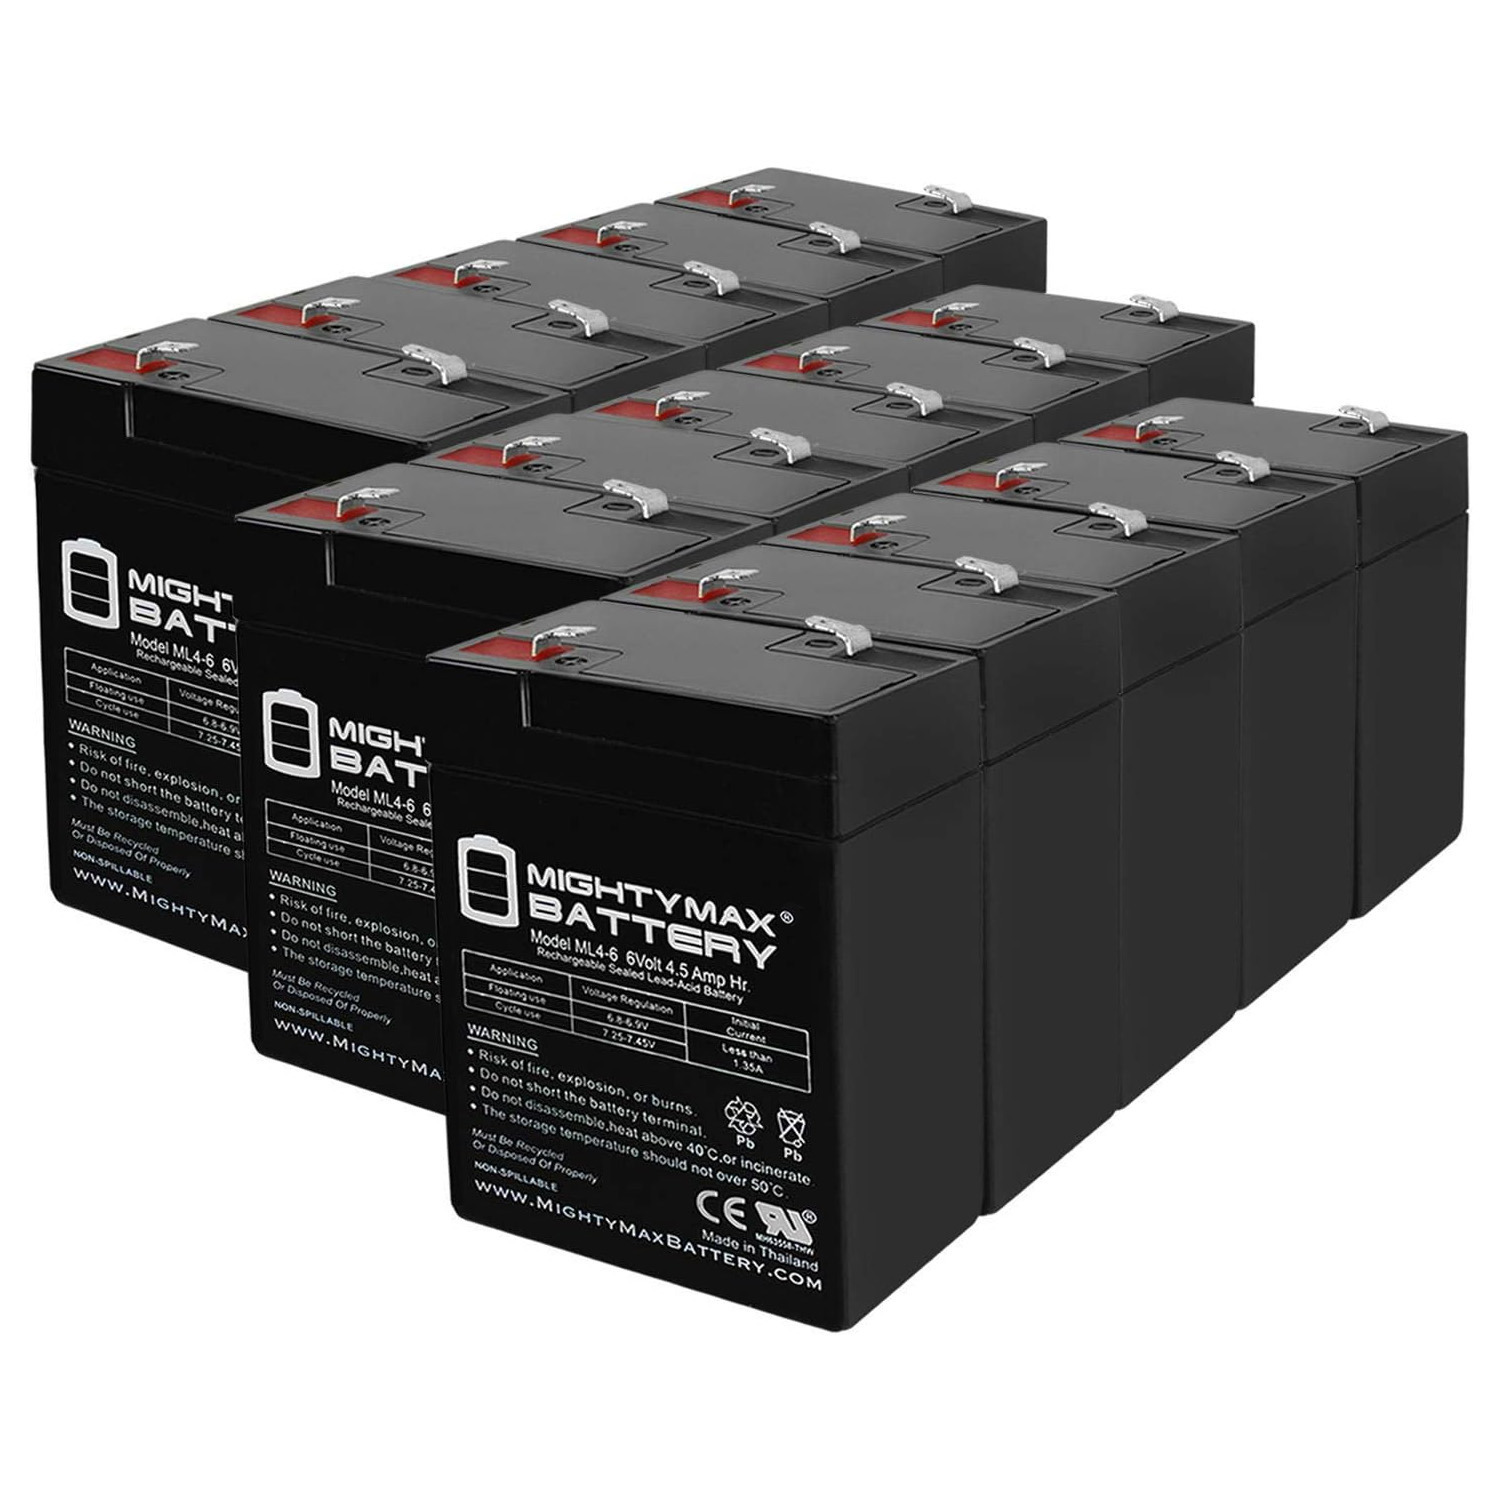 6V 4.5AH SLA Replacement Battery for Dual-Lite HCXURBRC12 - 15 Pack